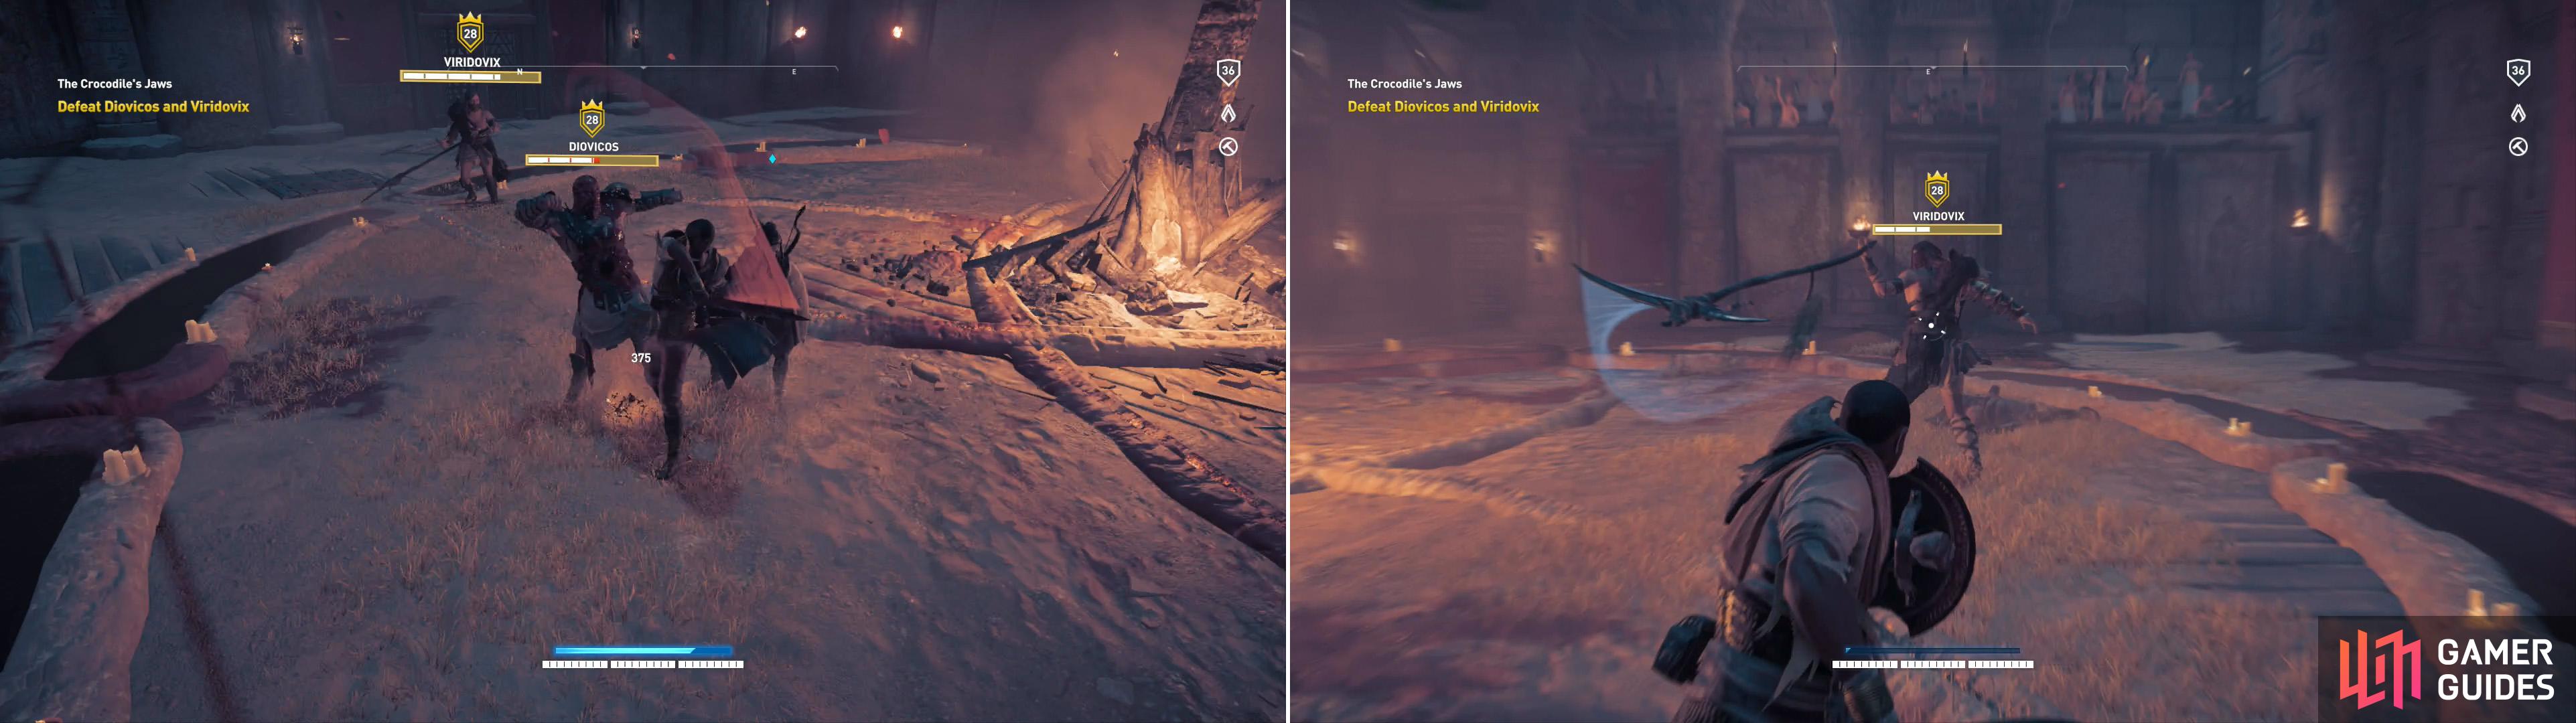 Diovicos can be lured from his brother, where he’s susceptible to hit-and-run heavy attacks (left). Viridovix is slower than his brother, but has superior attack range (right).